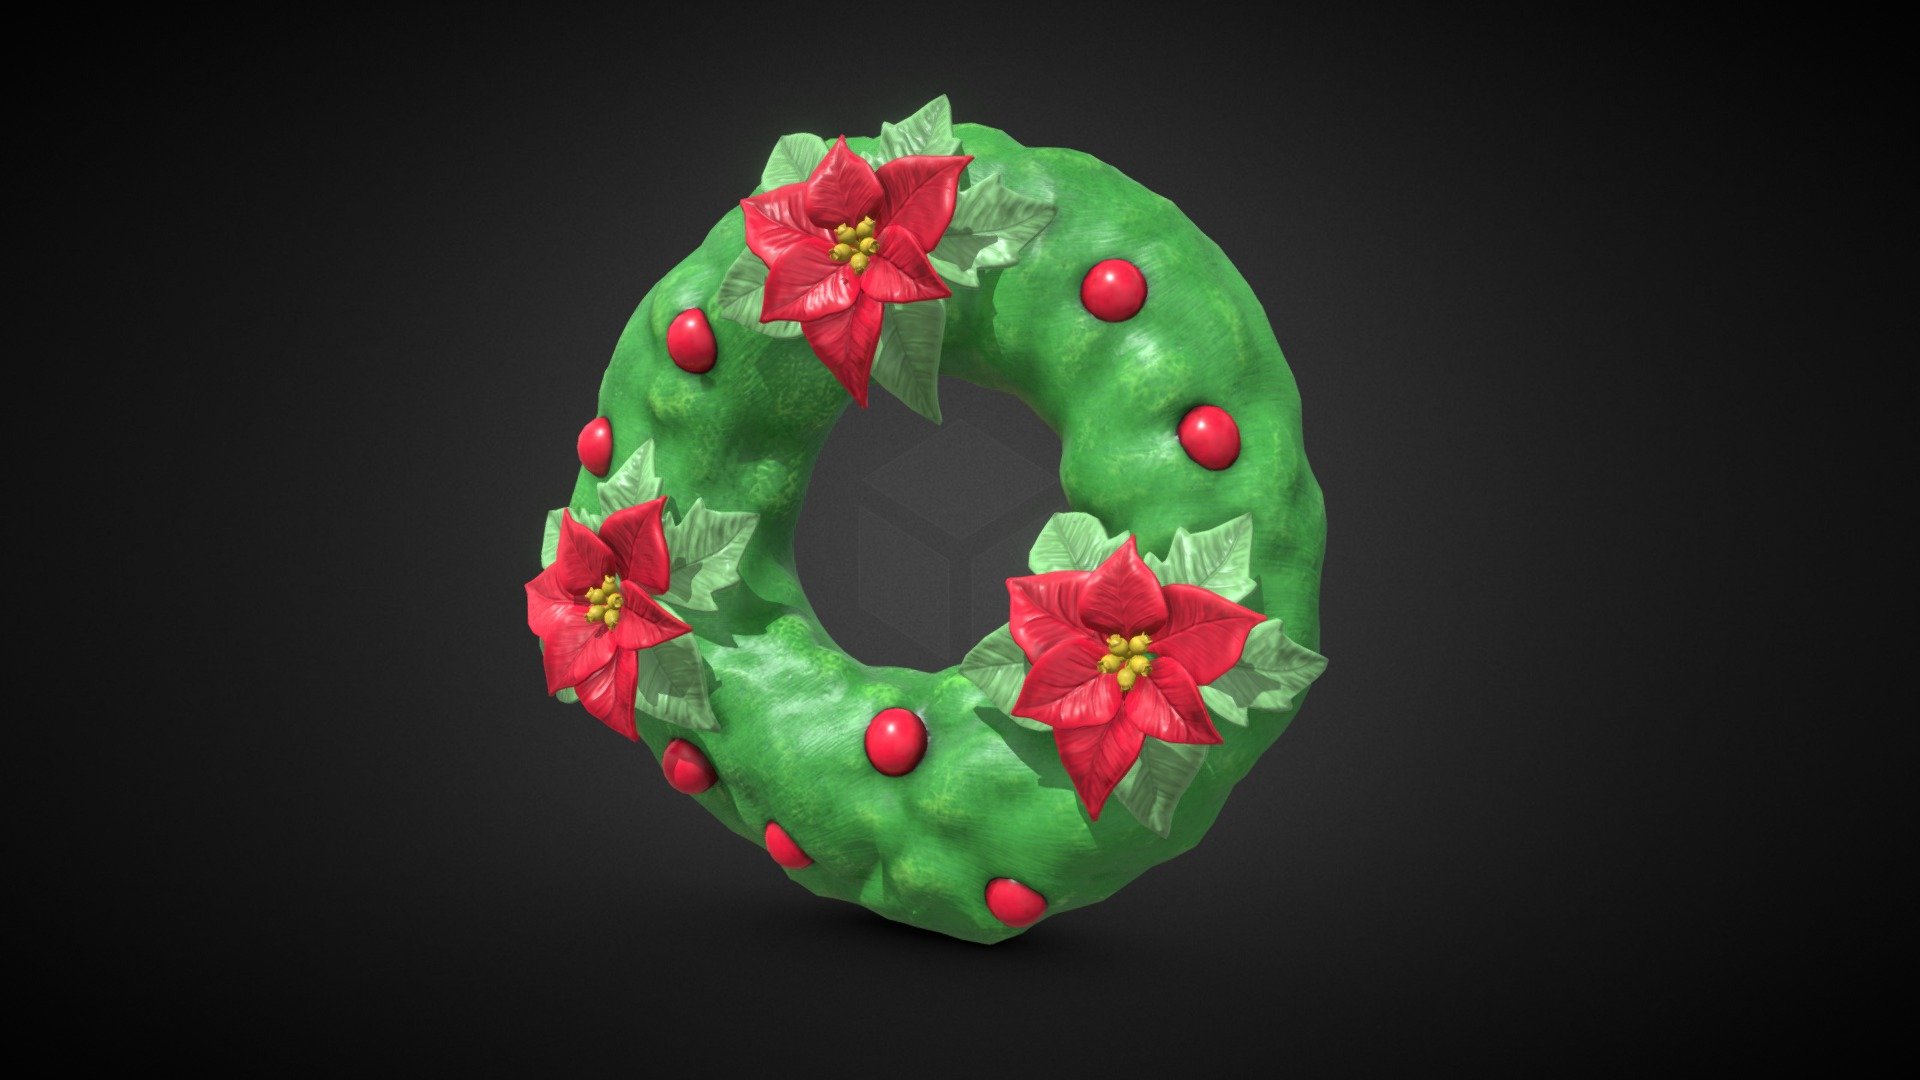 3D Stylized Christmas Wreath
Modeled and Sculpted with Blender.
Textured with Substance Painter.
Manually Unwrapped.
Low Poly - Stylized Christmas Wreath - Buy Royalty Free 3D model by Bacontaco 3d model